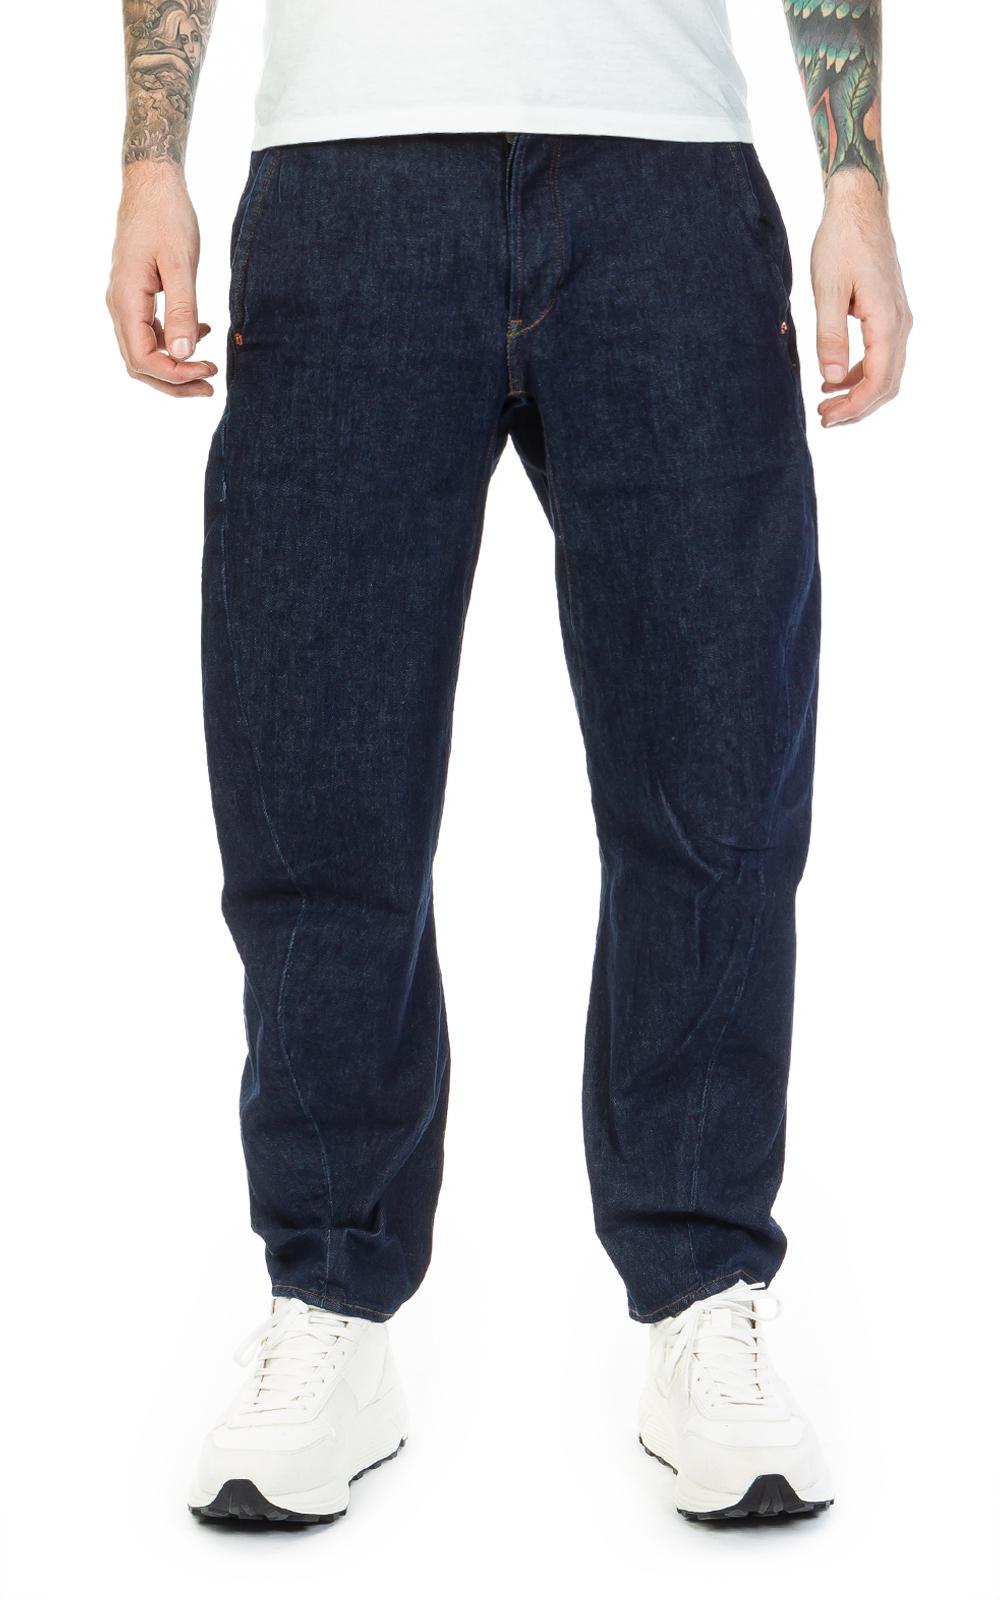 Levis 570 Baggy Taper on Sale, SAVE 33% - scoliosis.es